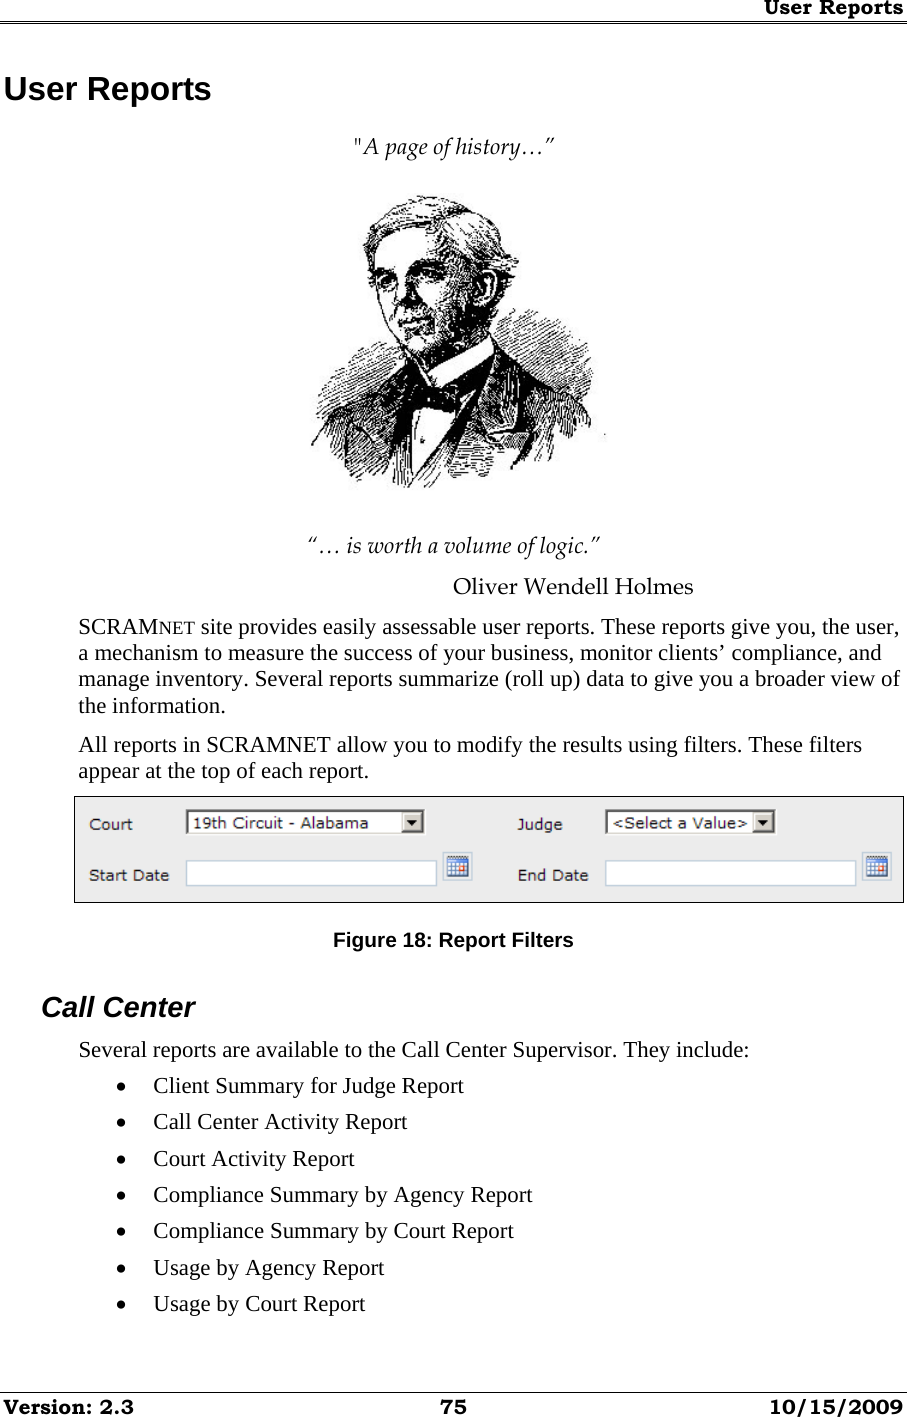 User Reports Version: 2.3  75  10/15/2009 User Reports &quot;A page of history…”  “… is worth a volume of logic.” Oliver Wendell Holmes SCRAMNET site provides easily assessable user reports. These reports give you, the user, a mechanism to measure the success of your business, monitor clients’ compliance, and manage inventory. Several reports summarize (roll up) data to give you a broader view of the information. All reports in SCRAMNET allow you to modify the results using filters. These filters appear at the top of each report.  Figure 18: Report Filters Call Center Several reports are available to the Call Center Supervisor. They include: • Client Summary for Judge Report • Call Center Activity Report • Court Activity Report • Compliance Summary by Agency Report • Compliance Summary by Court Report • Usage by Agency Report • Usage by Court Report 